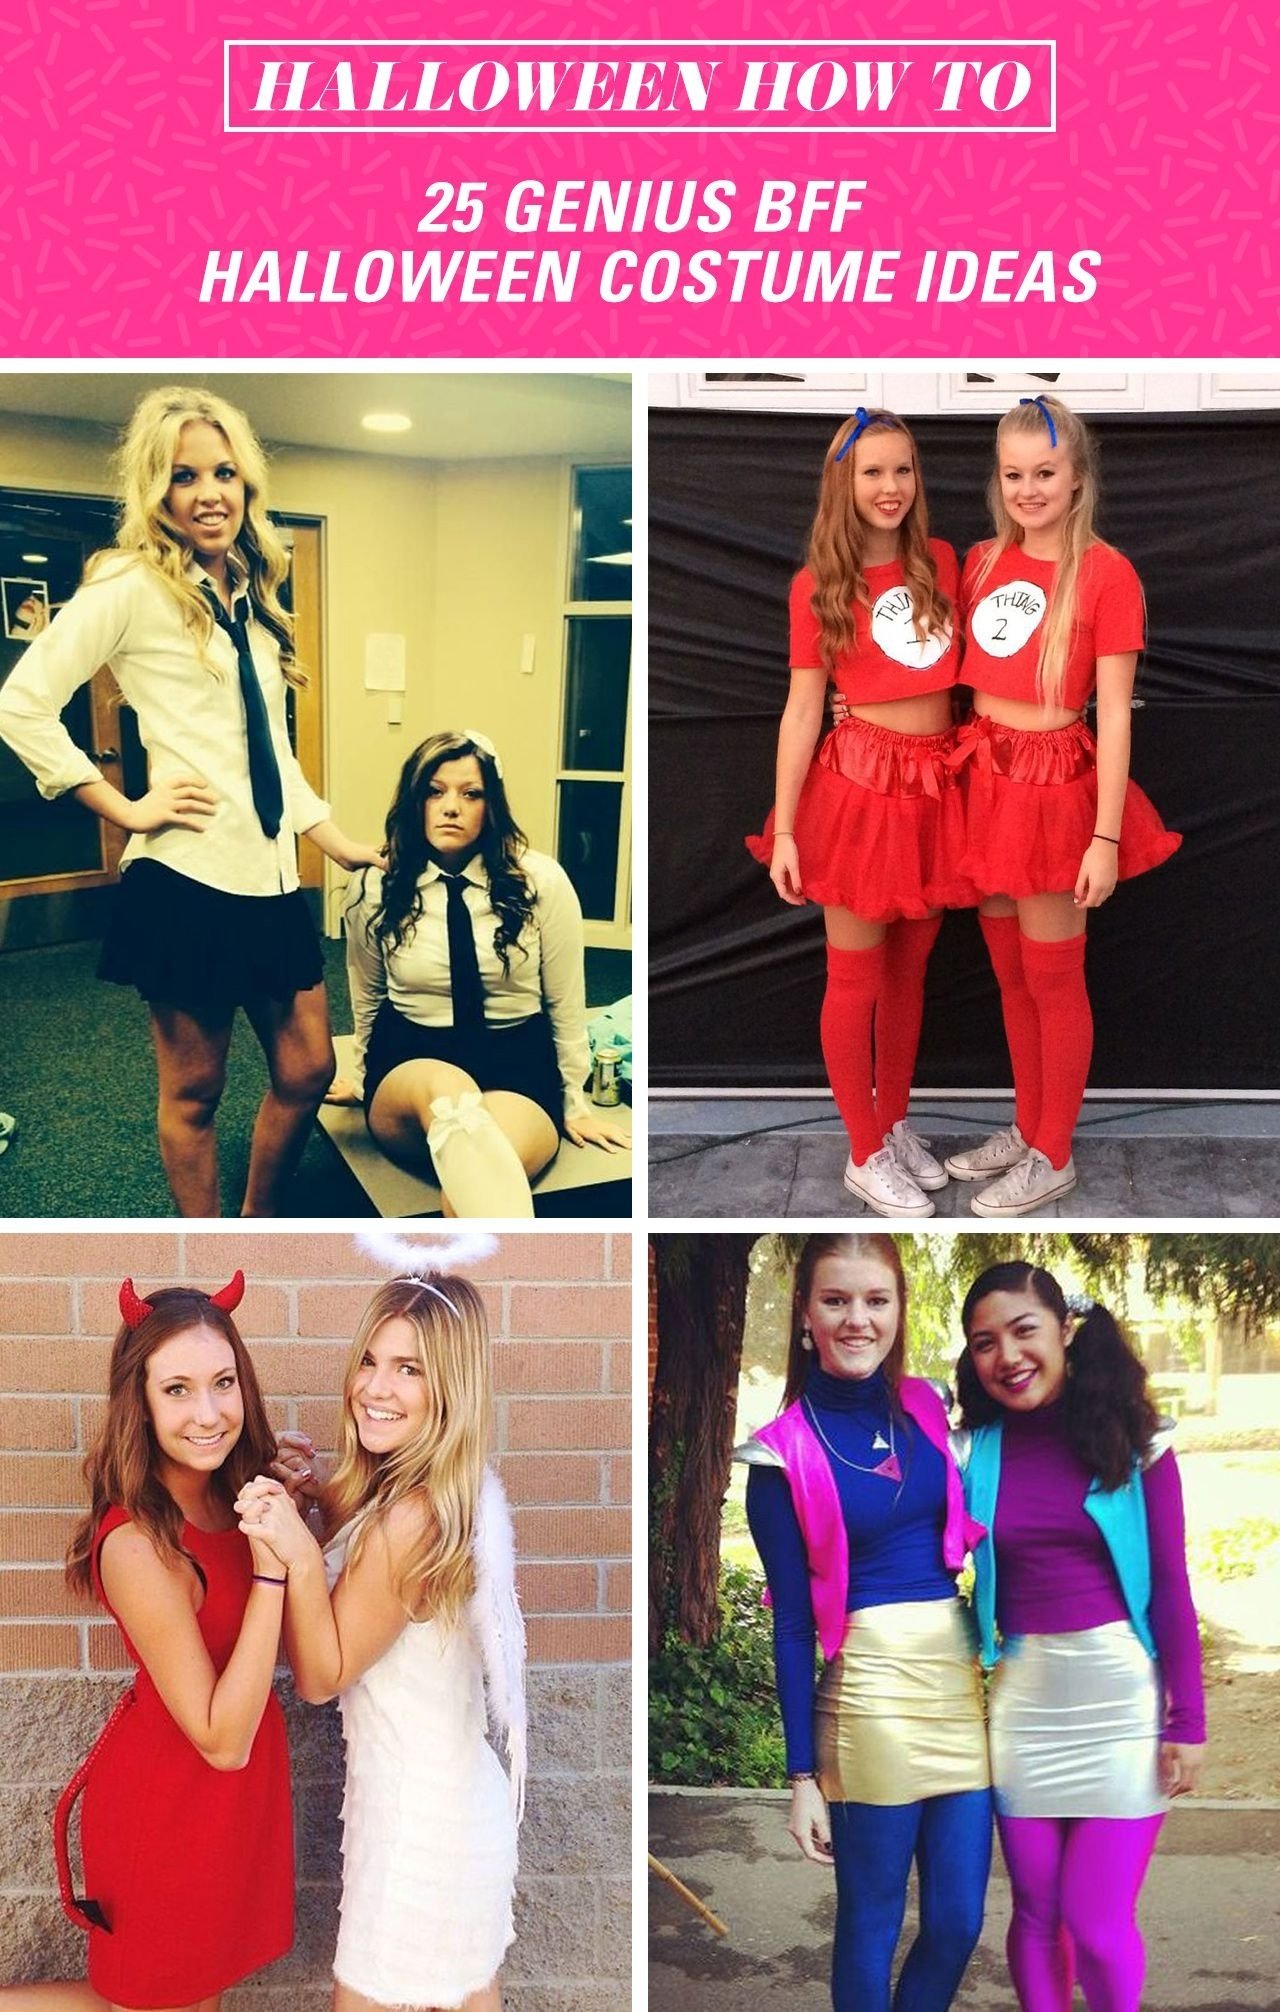 10 Perfect Two Person Halloween Costume Ideas 24 genius bff halloween costume ideas you need to try costumes 2022